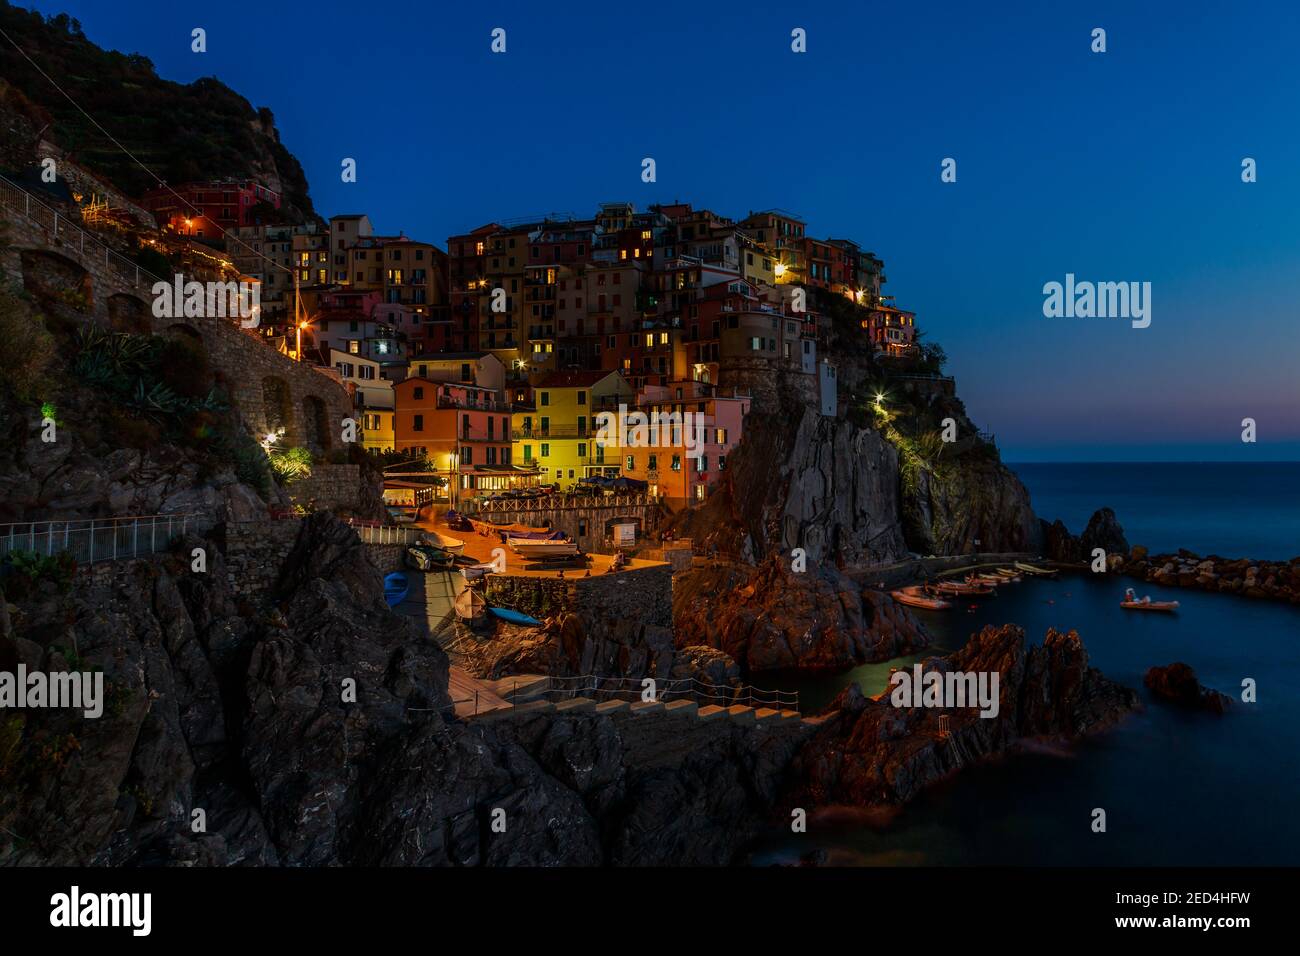 Looking over and down on a very colorful night in the rocky Italian seacoast village and historic waterfront of Manarola, Cinque Terre, Italy Stock Photo